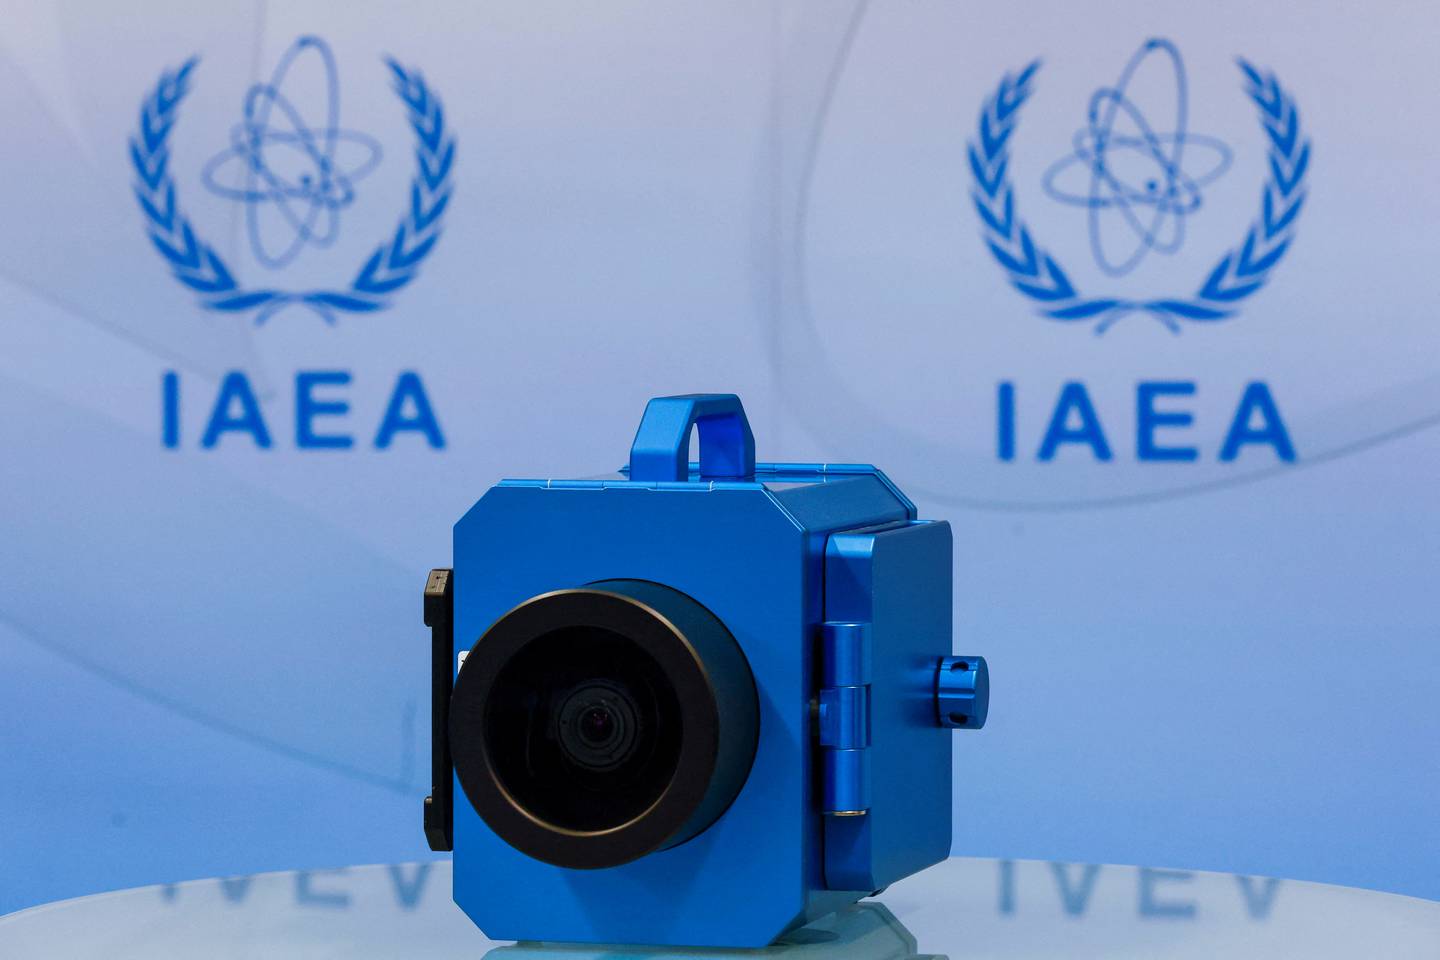 A surveillance camera is displayed during a news conference in Vienna, about developments related to the IAEA's monitoring and verification work in Iran. Reuters